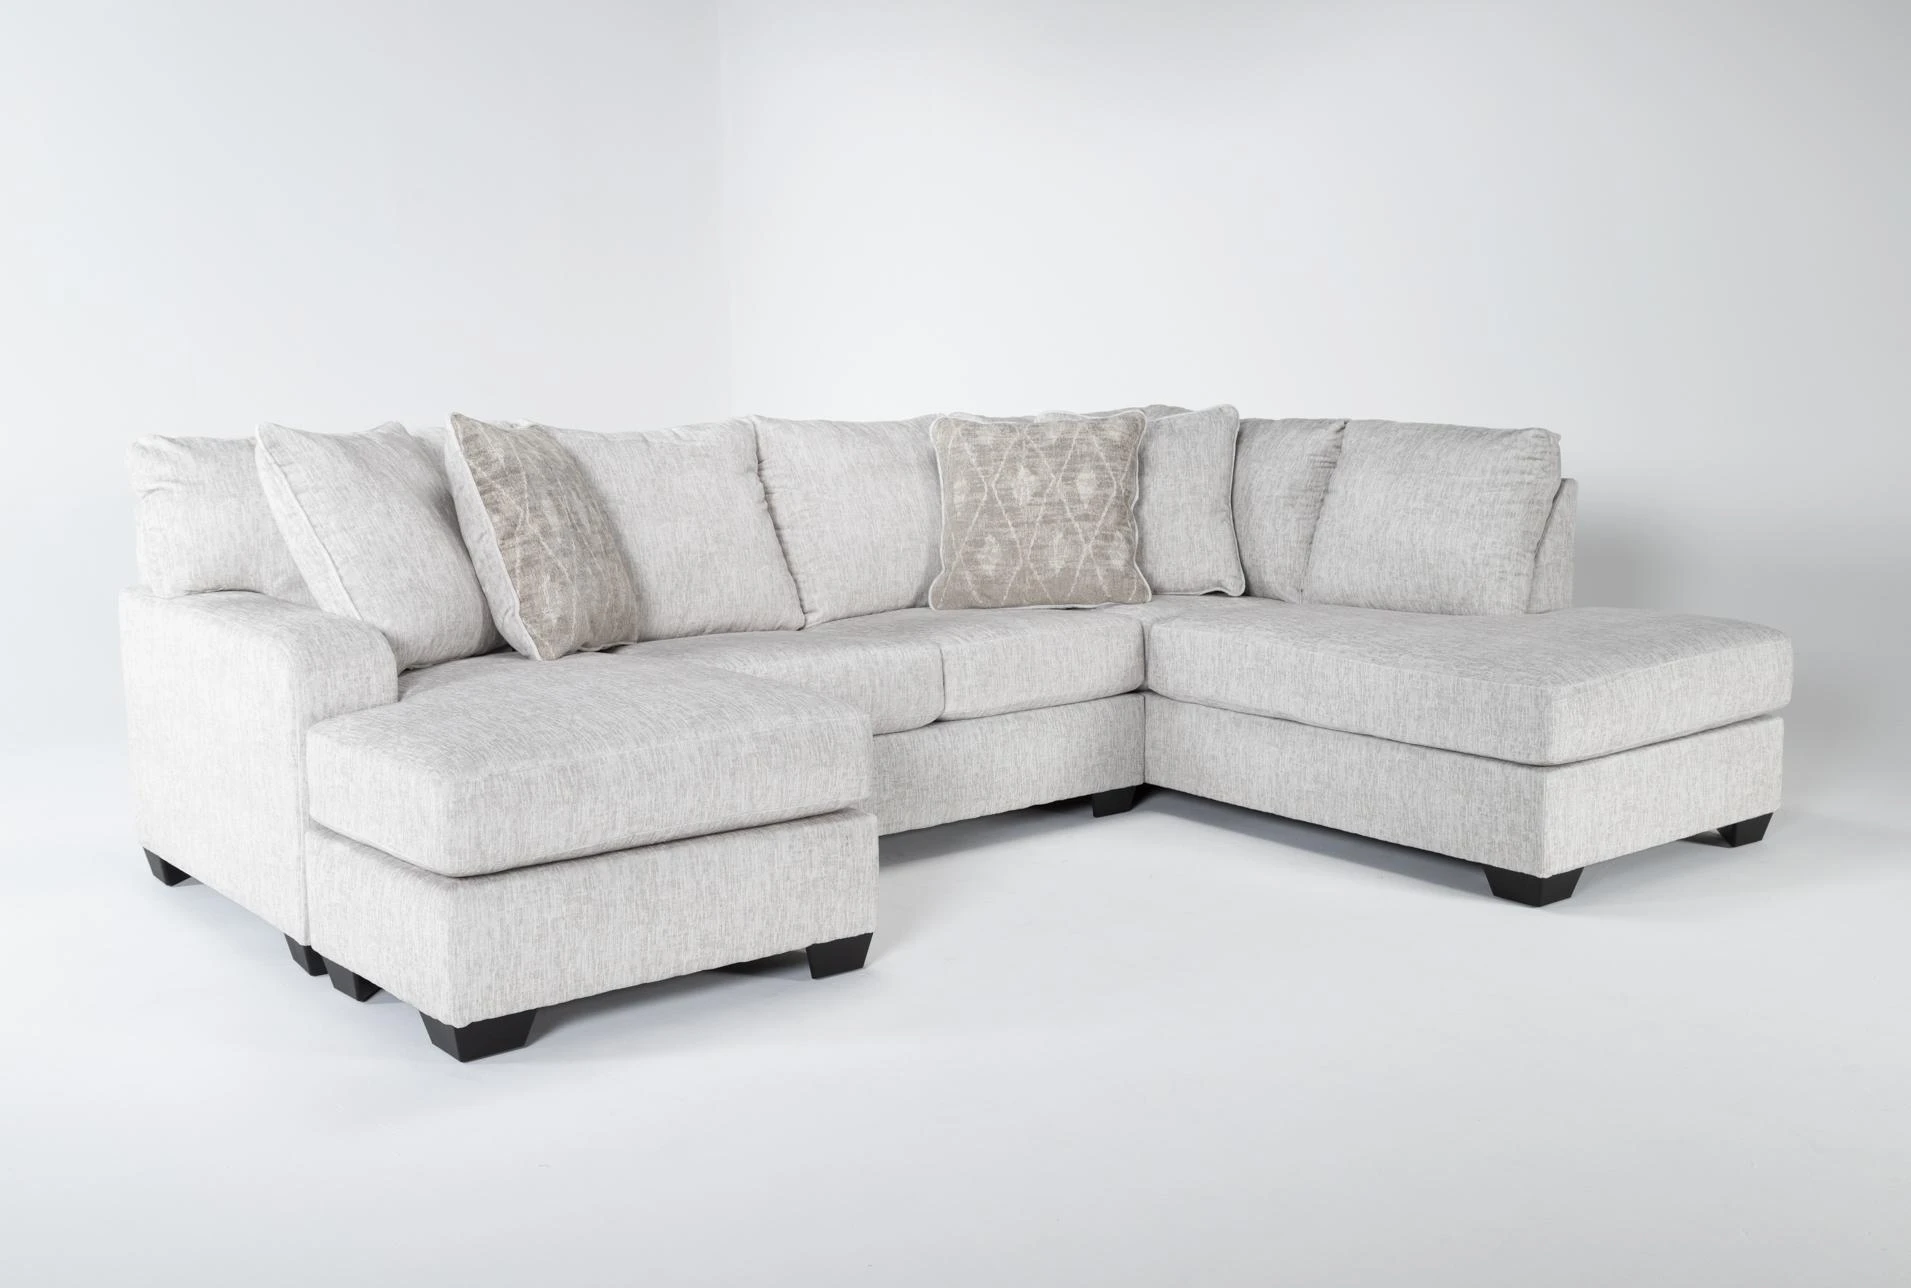 Cambrie 124 2 Piece Dual Chaise Sectional With Left Arm Facing Sofa And Right Corner Living Es